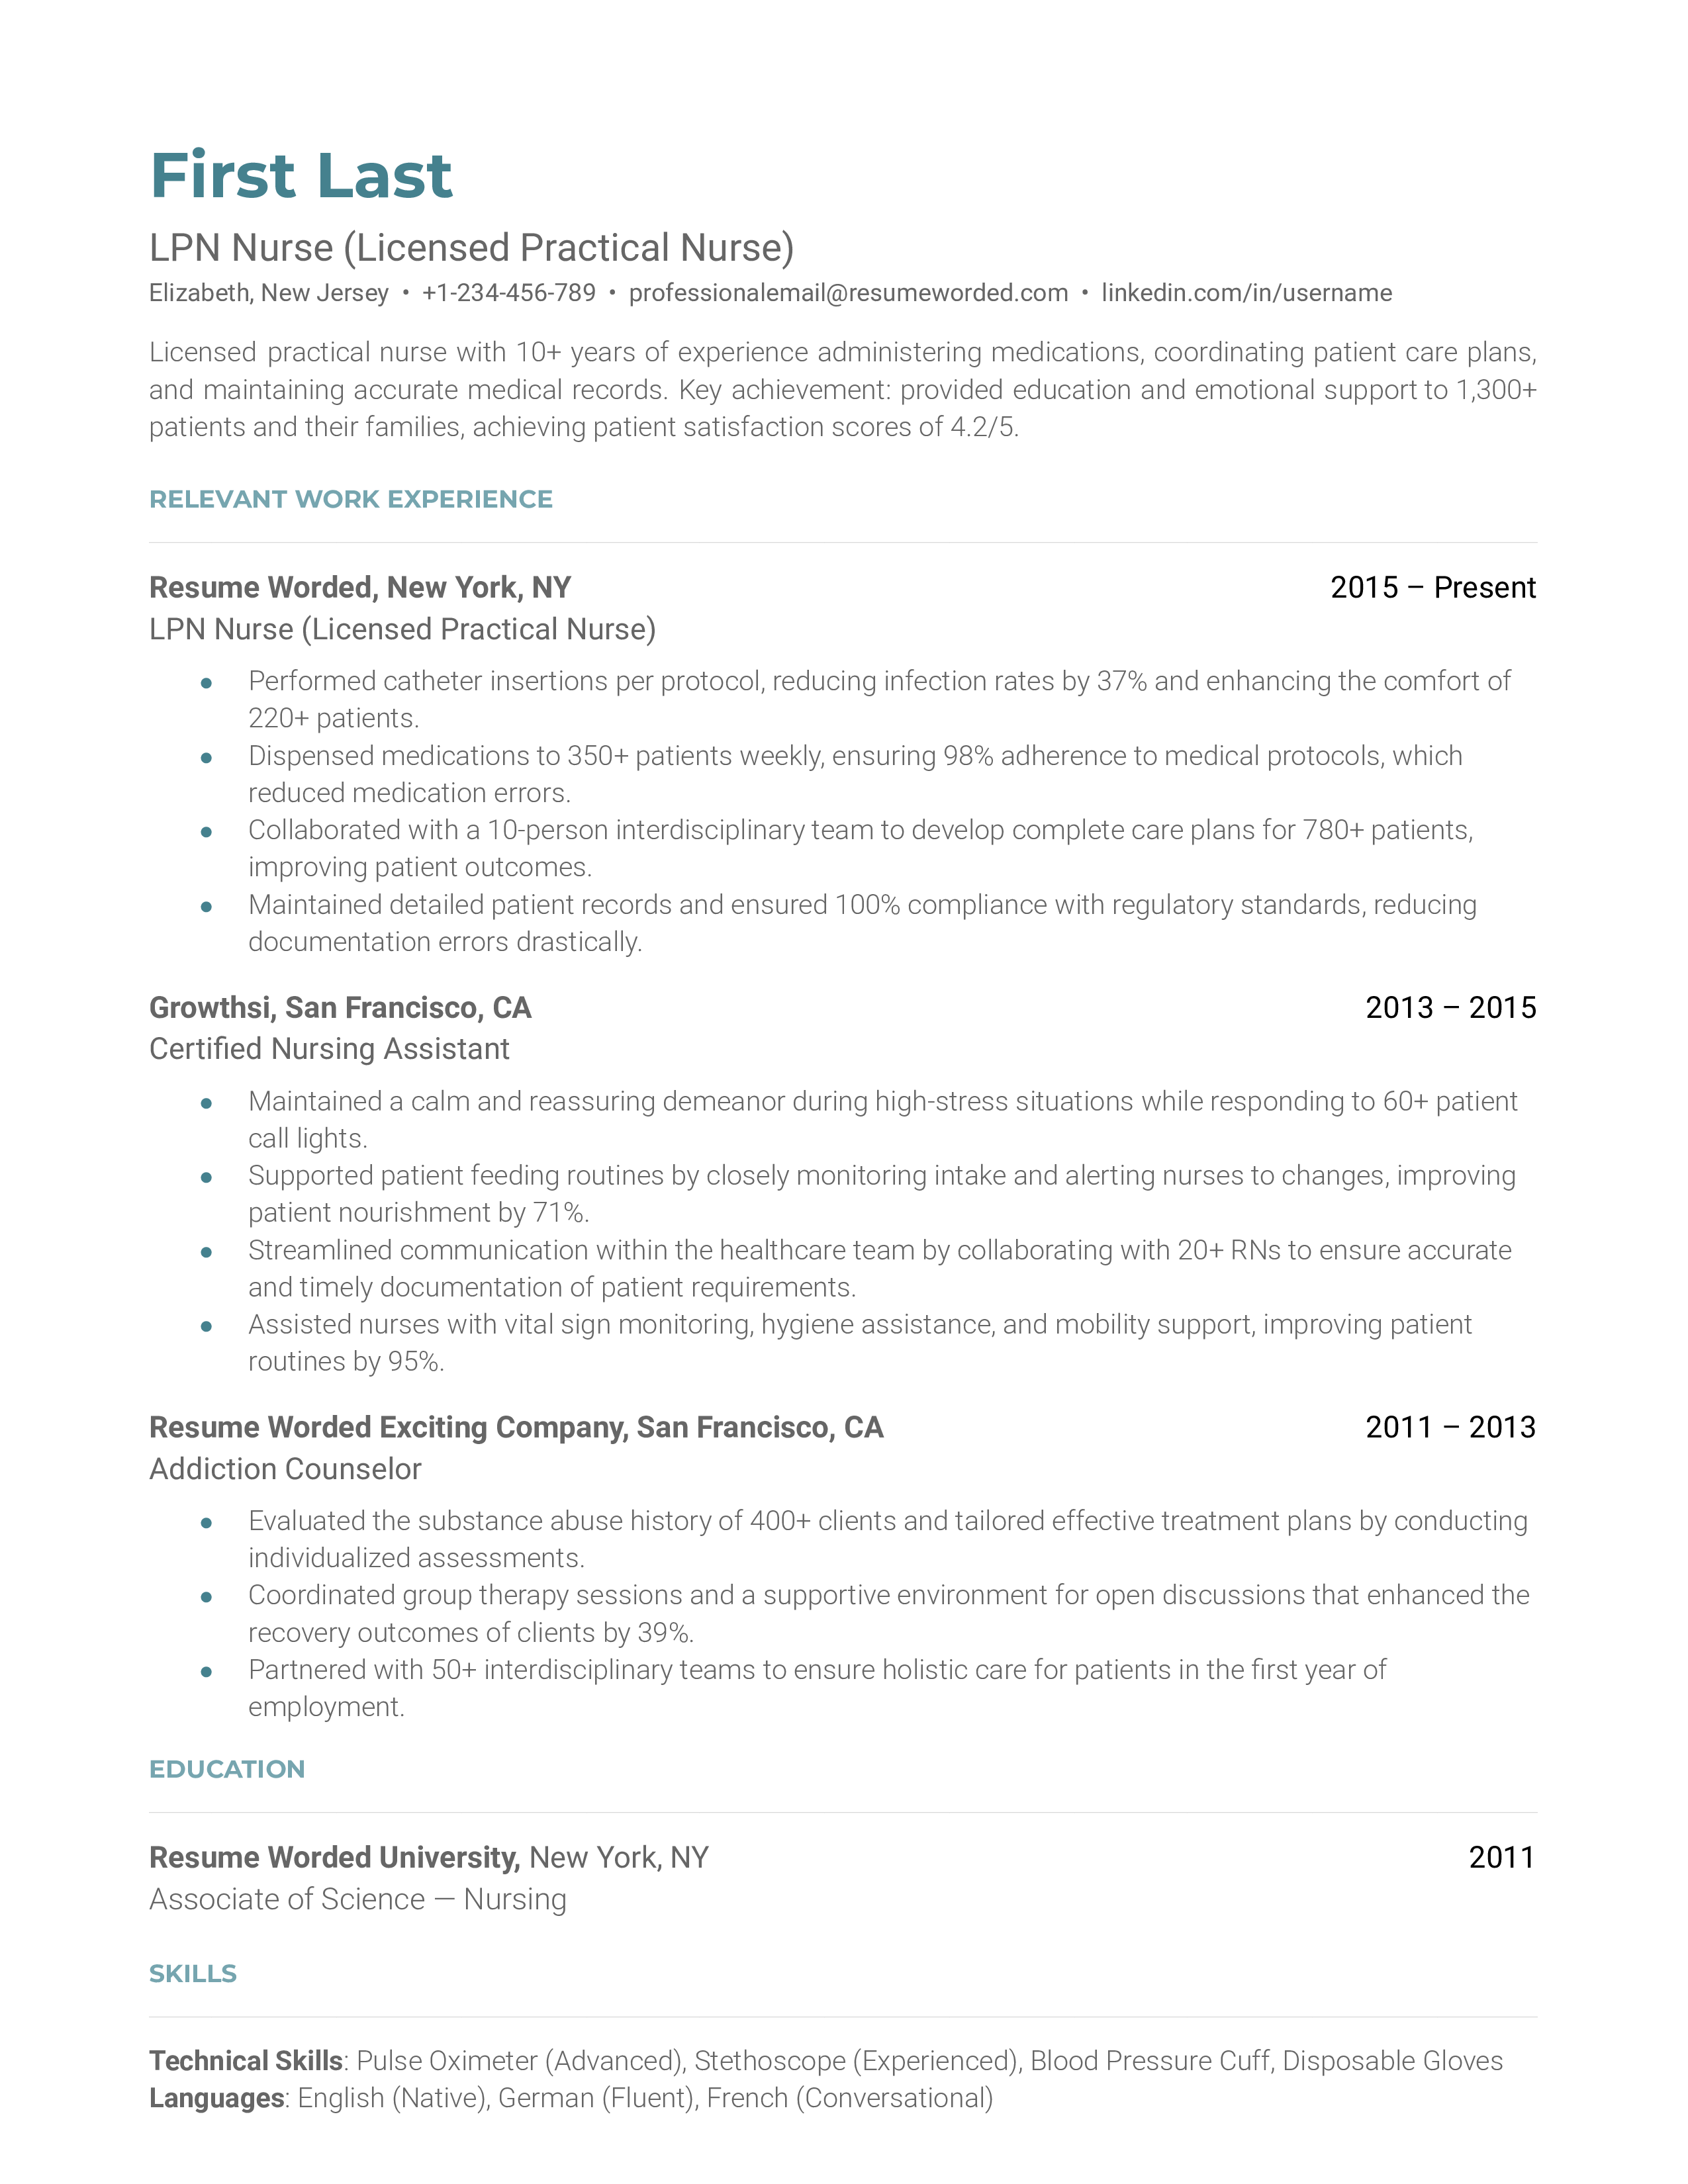 A resume for a Licensed Practical Nurse showcasing certifications and patient care experience.